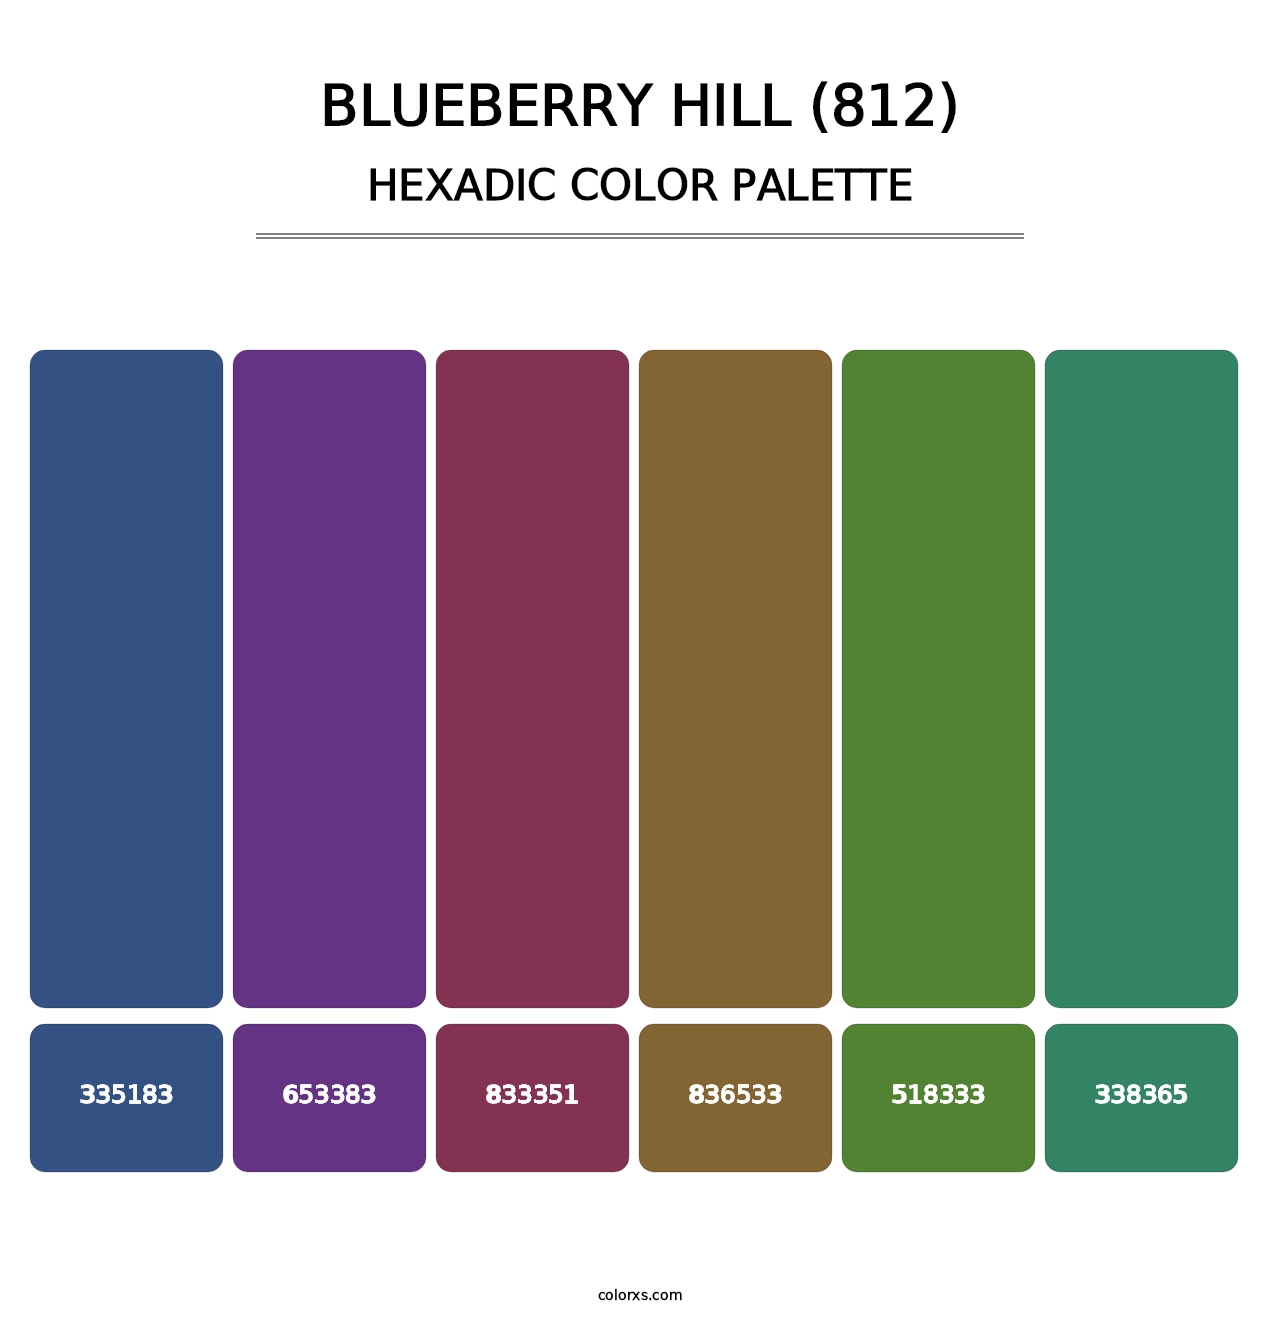 Blueberry Hill (812) - Hexadic Color Palette